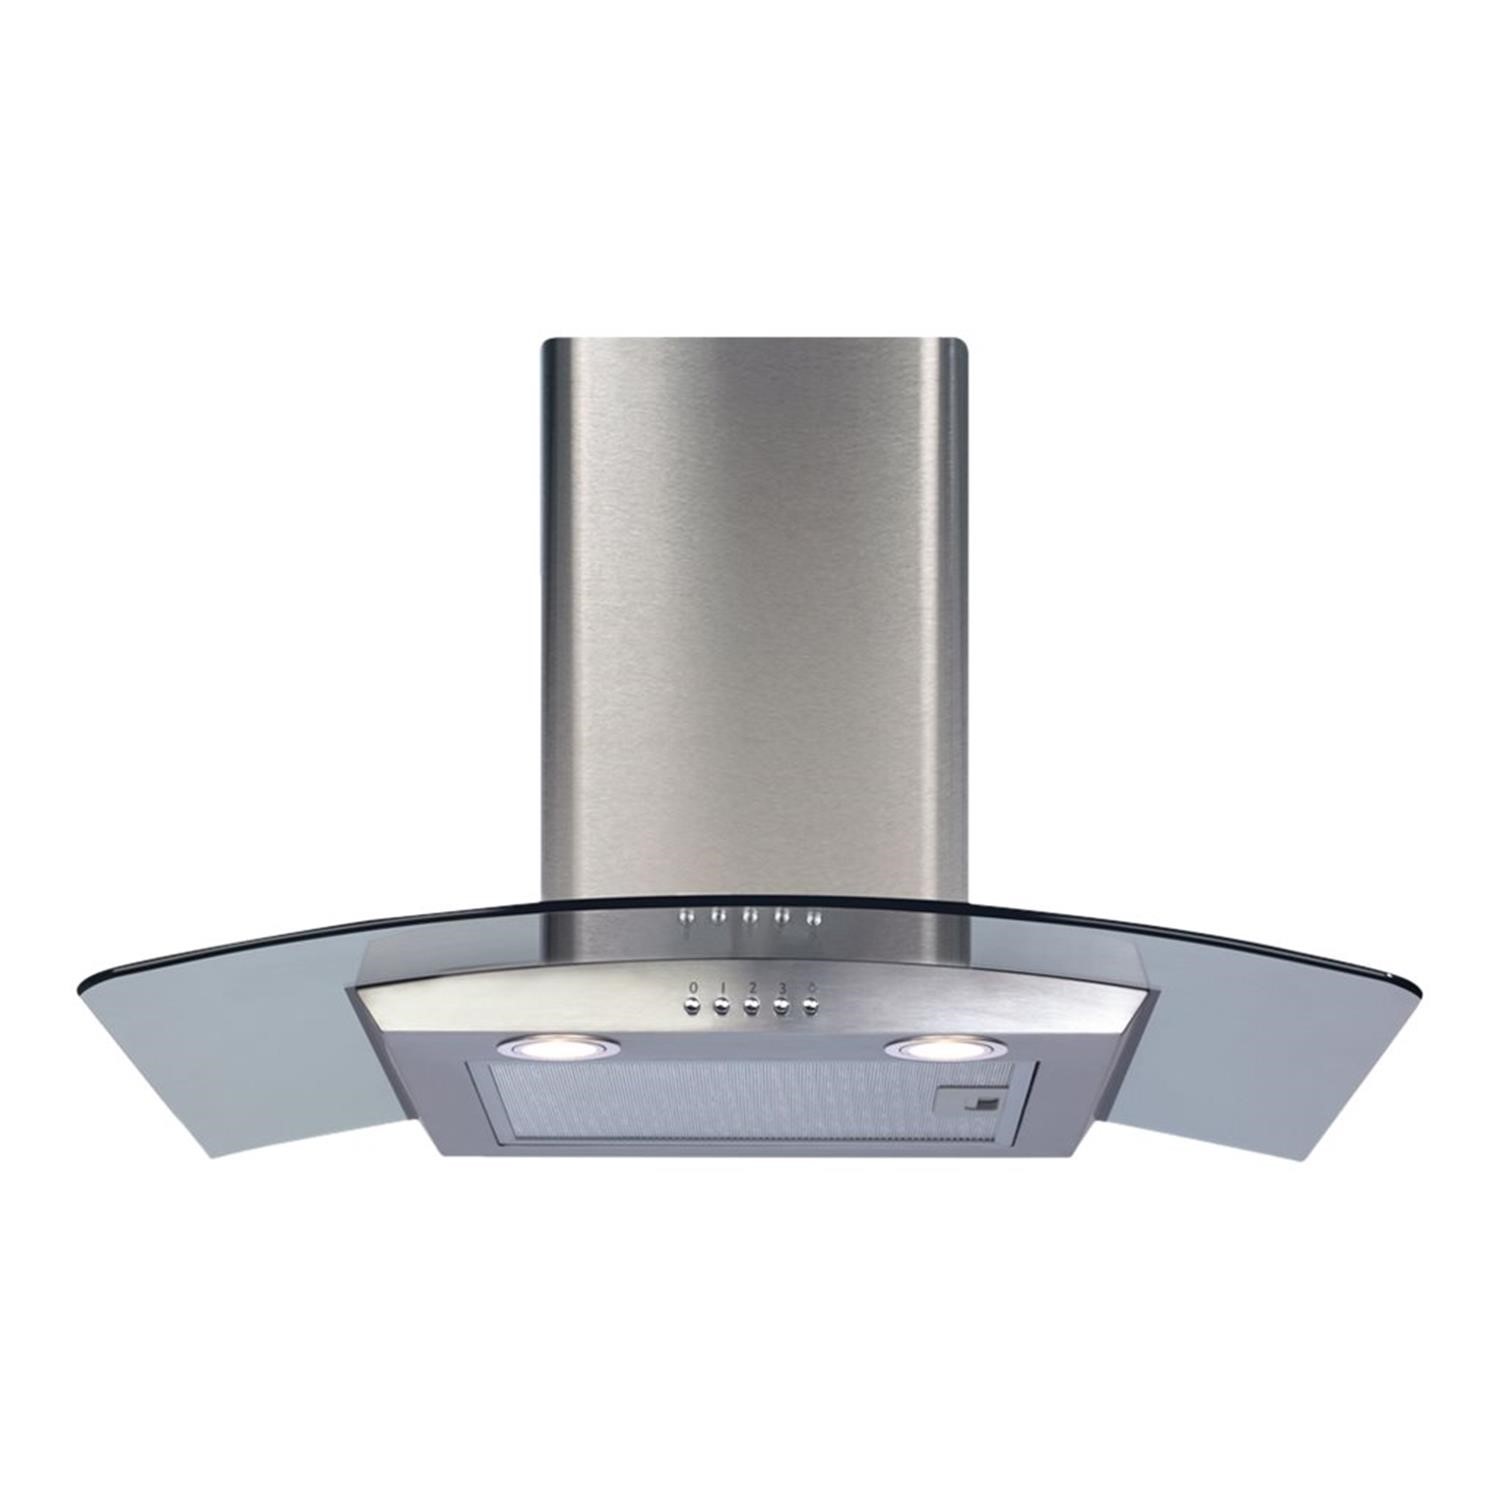 Refurbished CDA ECP72SS Curved Glass 70cm Chimney Cooker Hood Stainless Steel